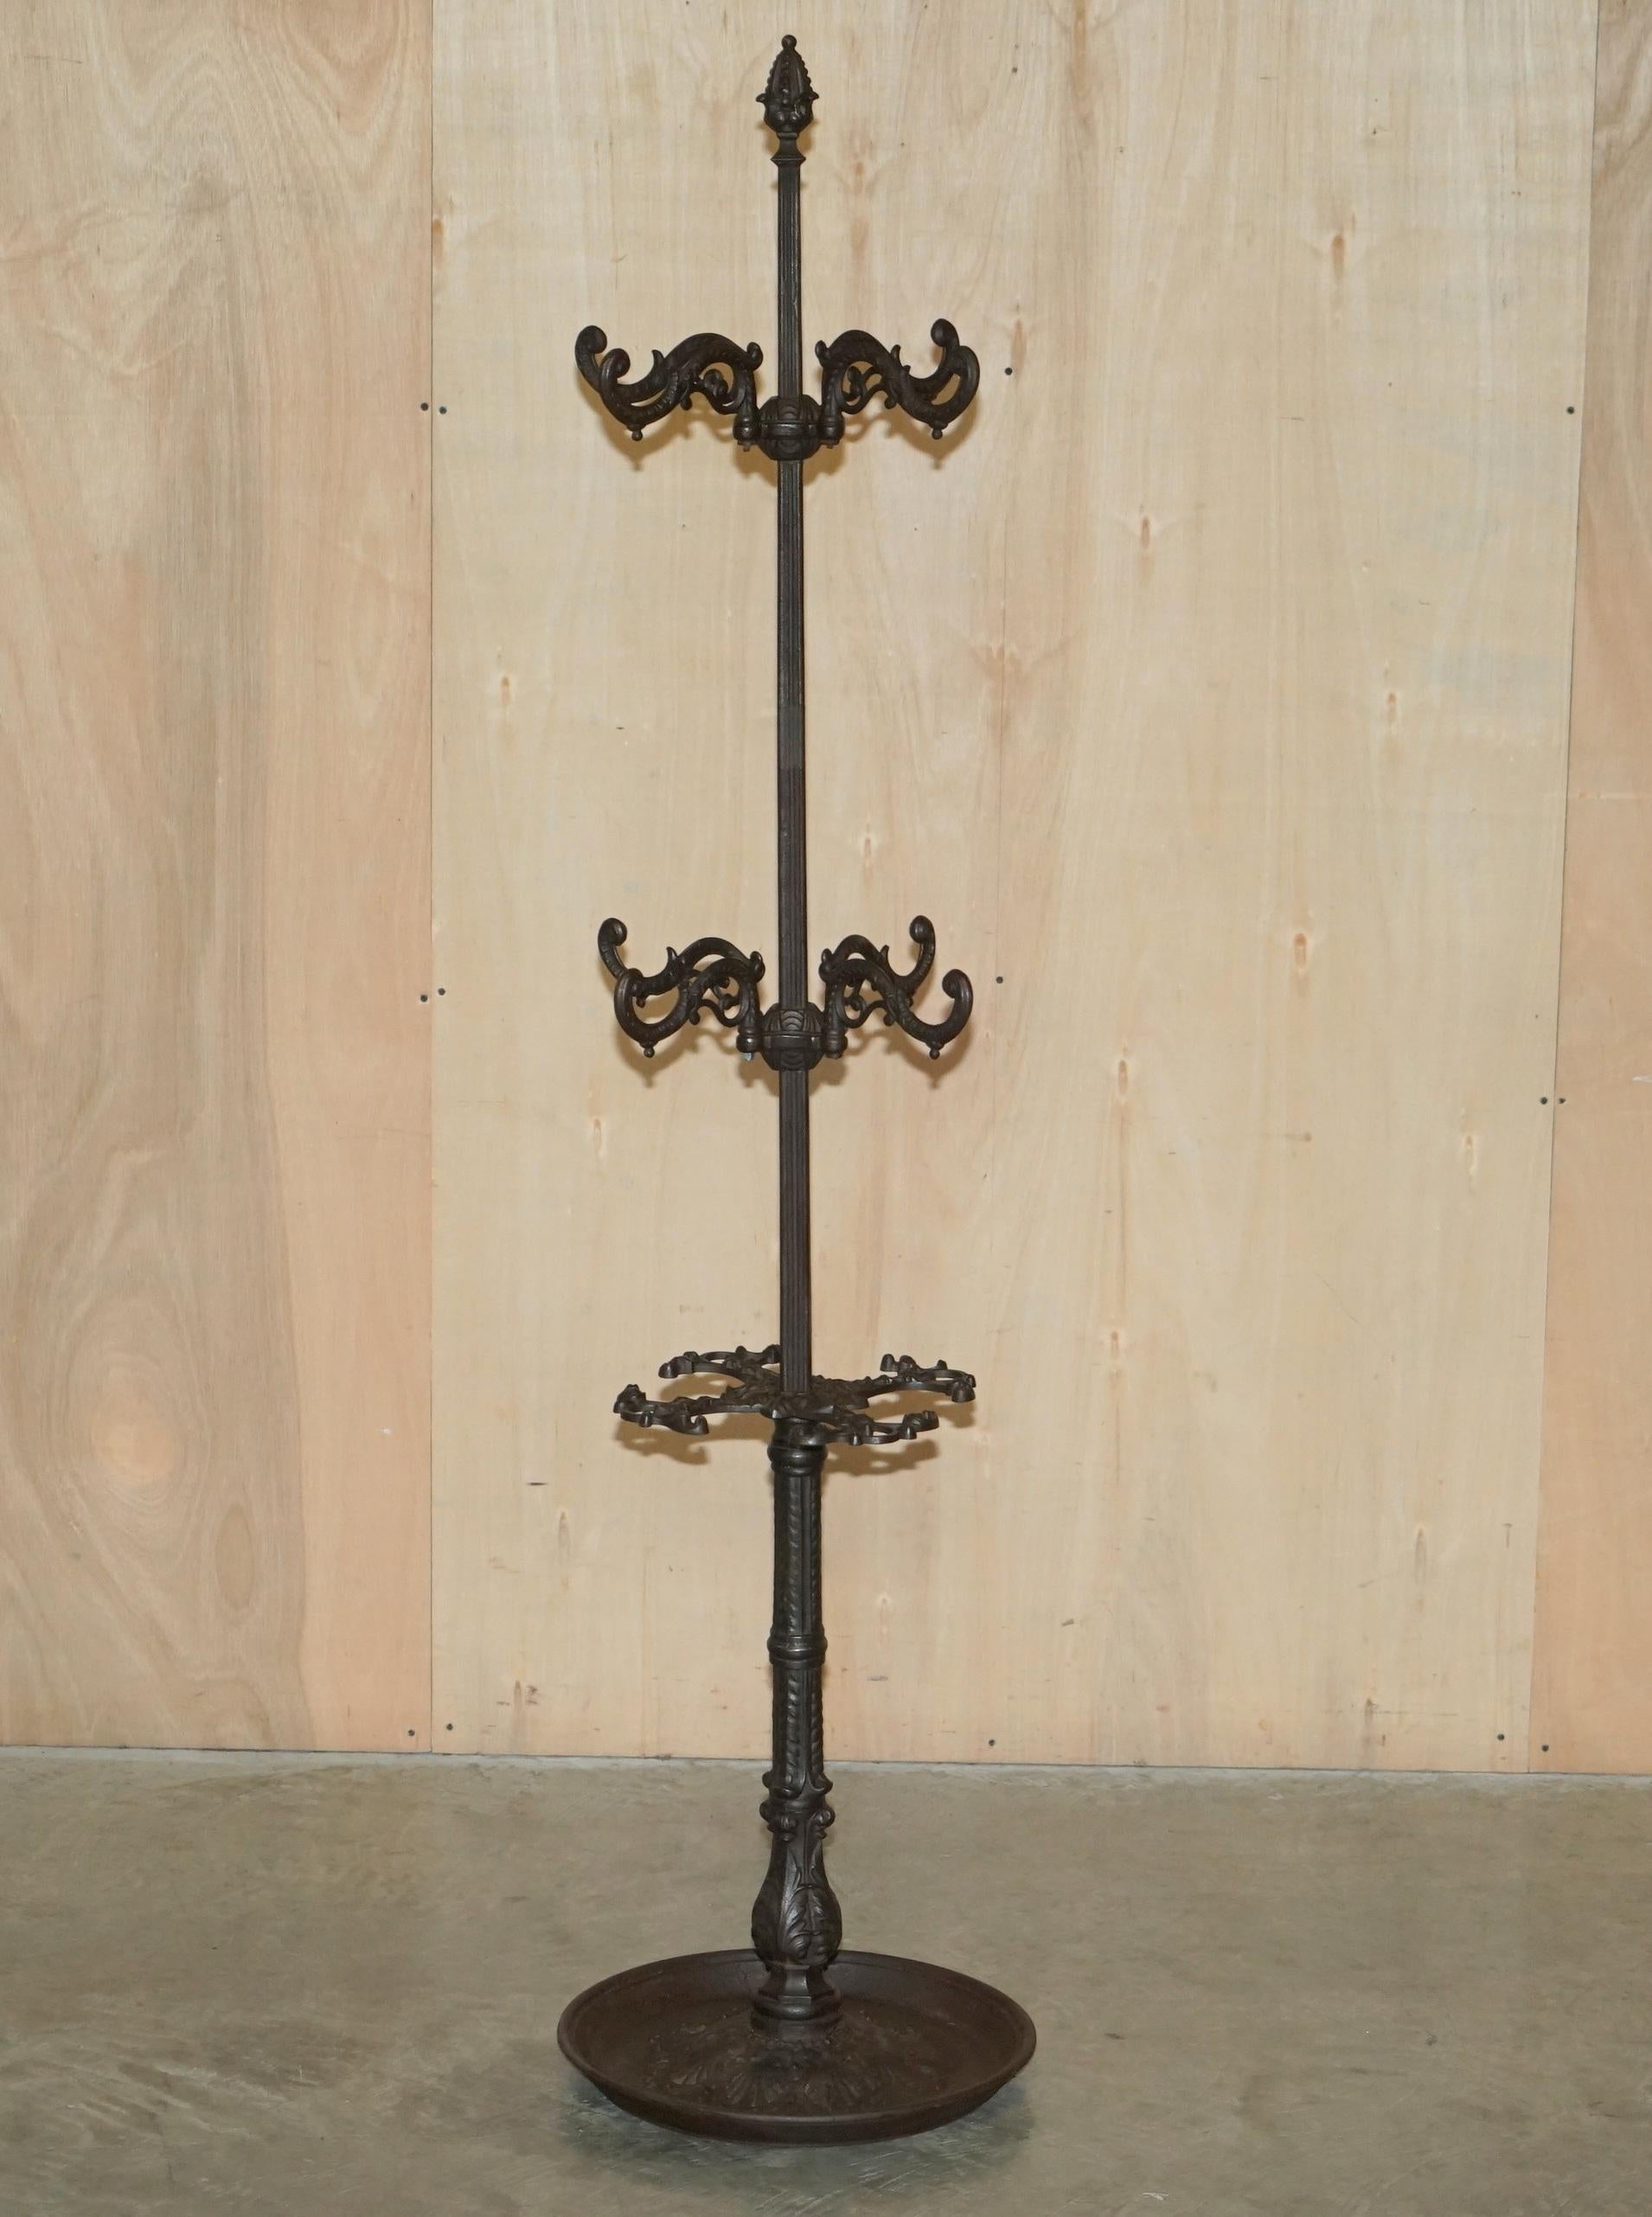 We are delighted to offer for sale this stunning original circa 1880-1900 Cast Iron, hat, glove, umbrella, and coat stand

This is a bit of a unicorn in the world of coat stands, it’s a very classically English style, I've not seen one free